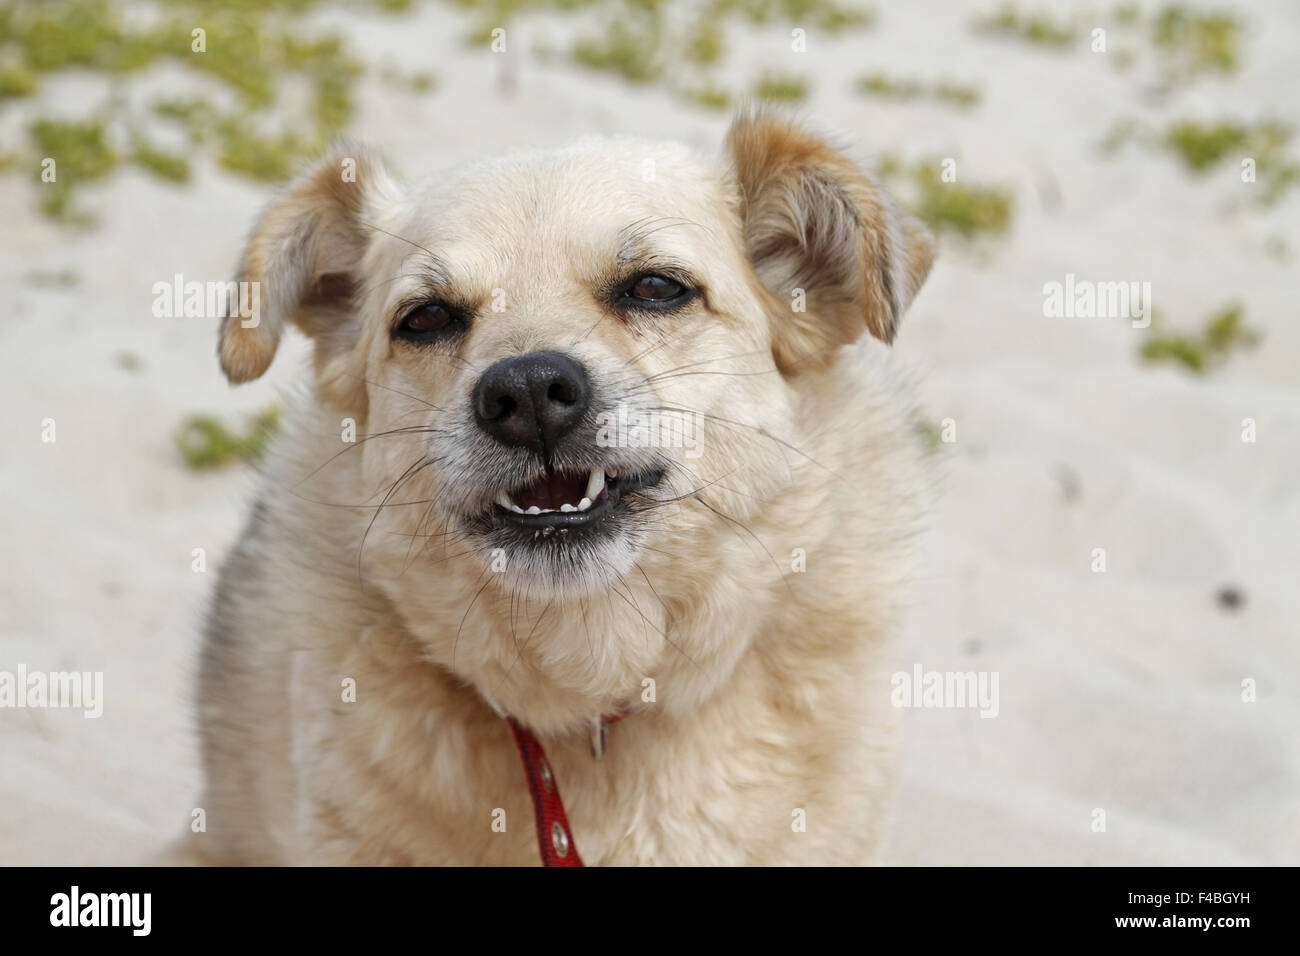 dog making a face Stock Photo